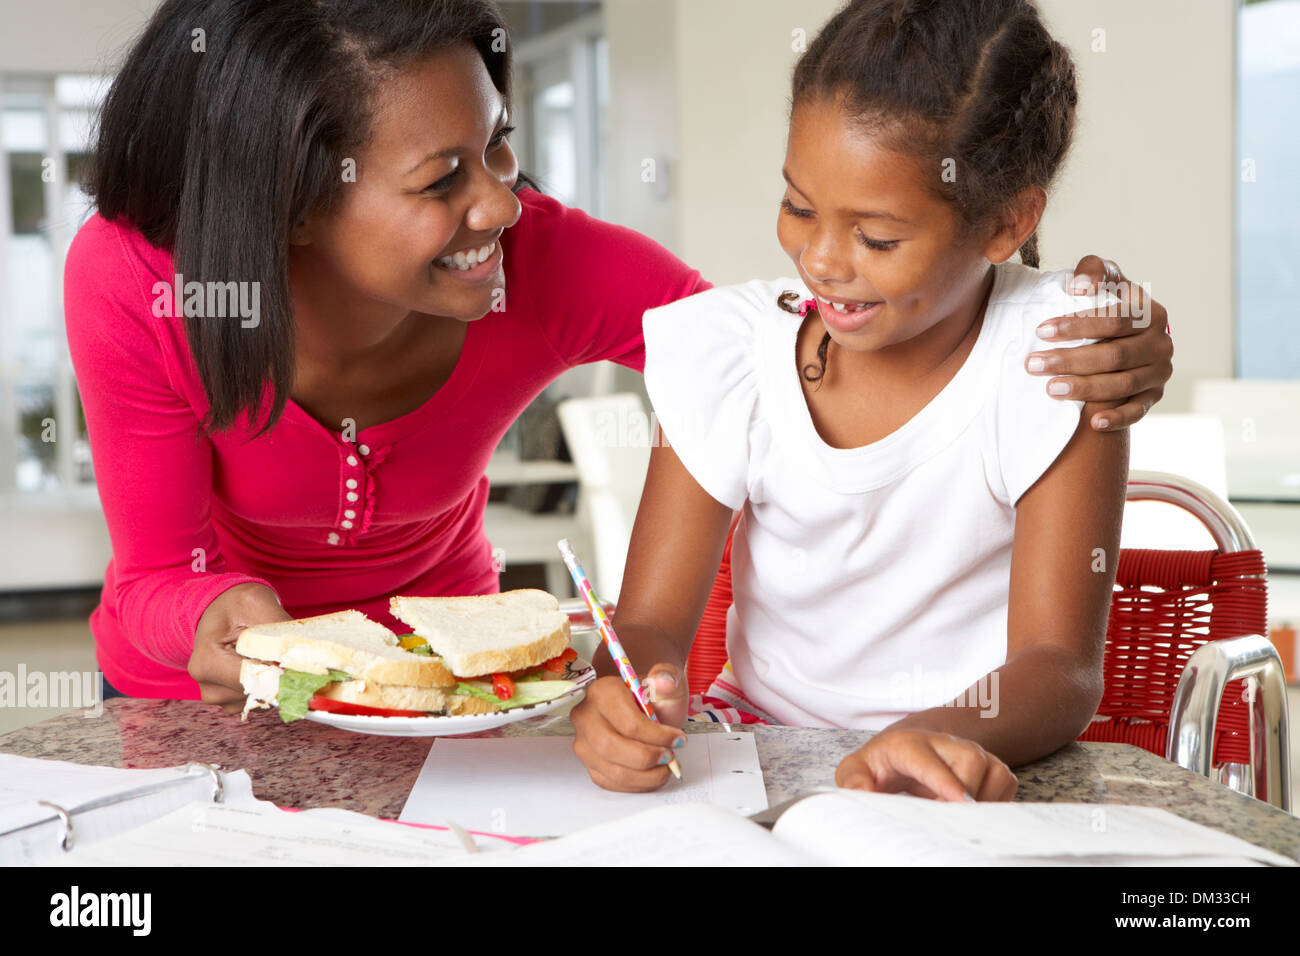 Mother Brings Daughter Sandwich Whilst She Studies Stock Photo